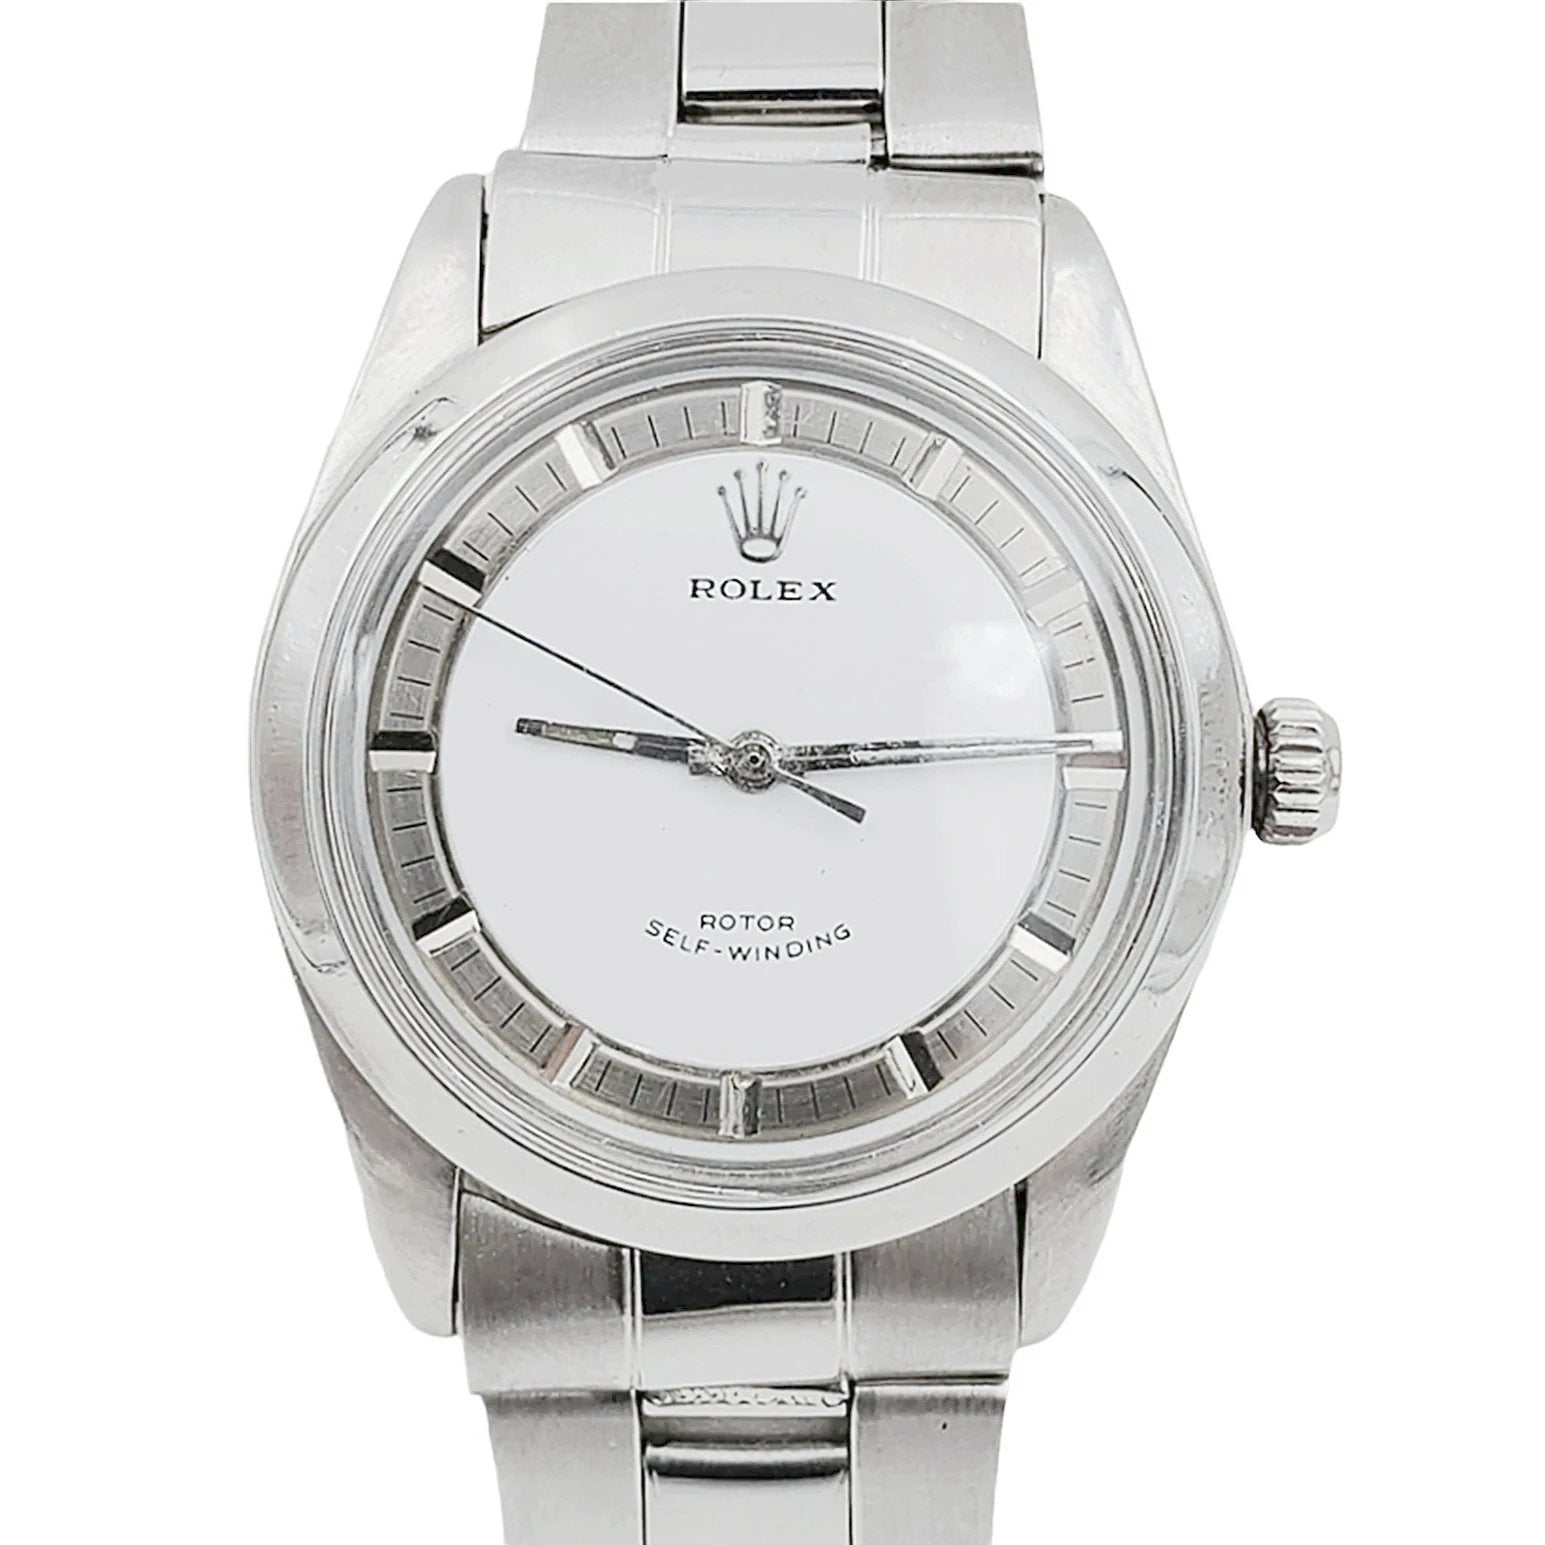 Men's Tudor 34mm Vintage Oyster Prince Stainless Steel Watch with White Tuxedo Custom Dial and Smooth Bezel. (Pre-Owned)